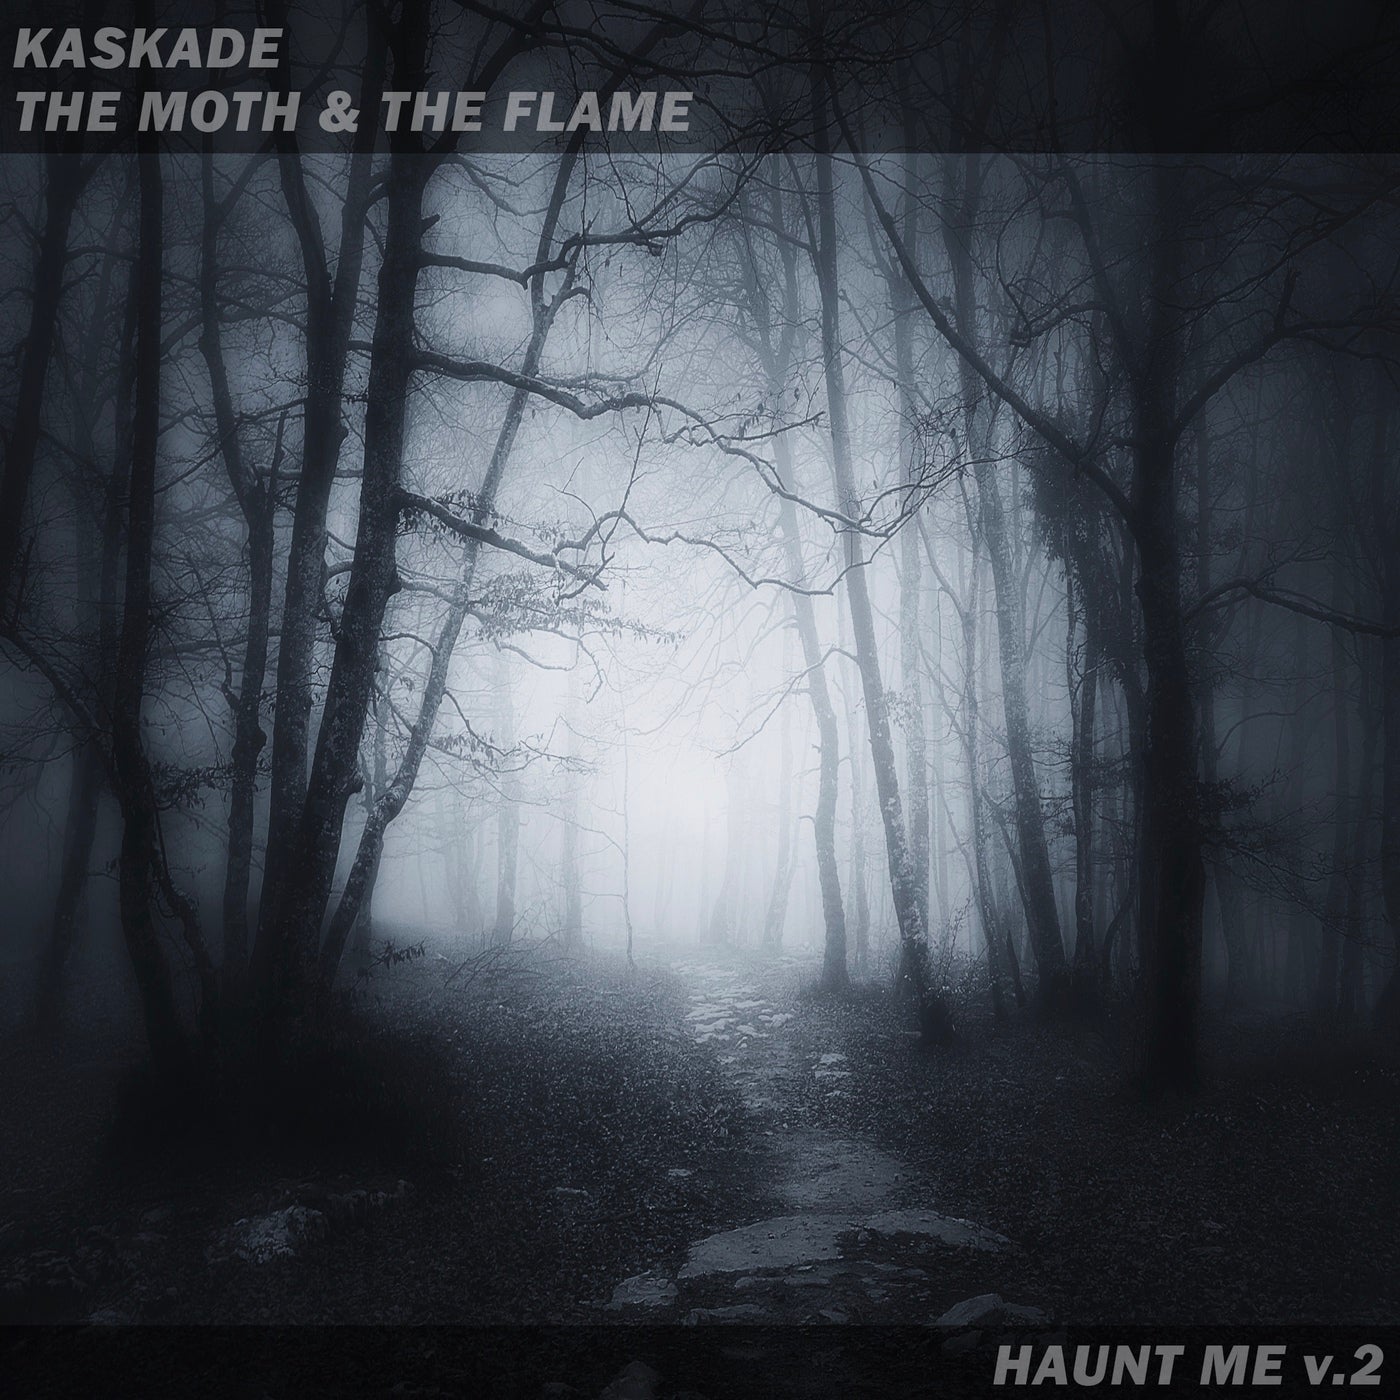 Kaskade, The Moth And The Flame - Haunt Me V.2 (extended) on Revolution Radio